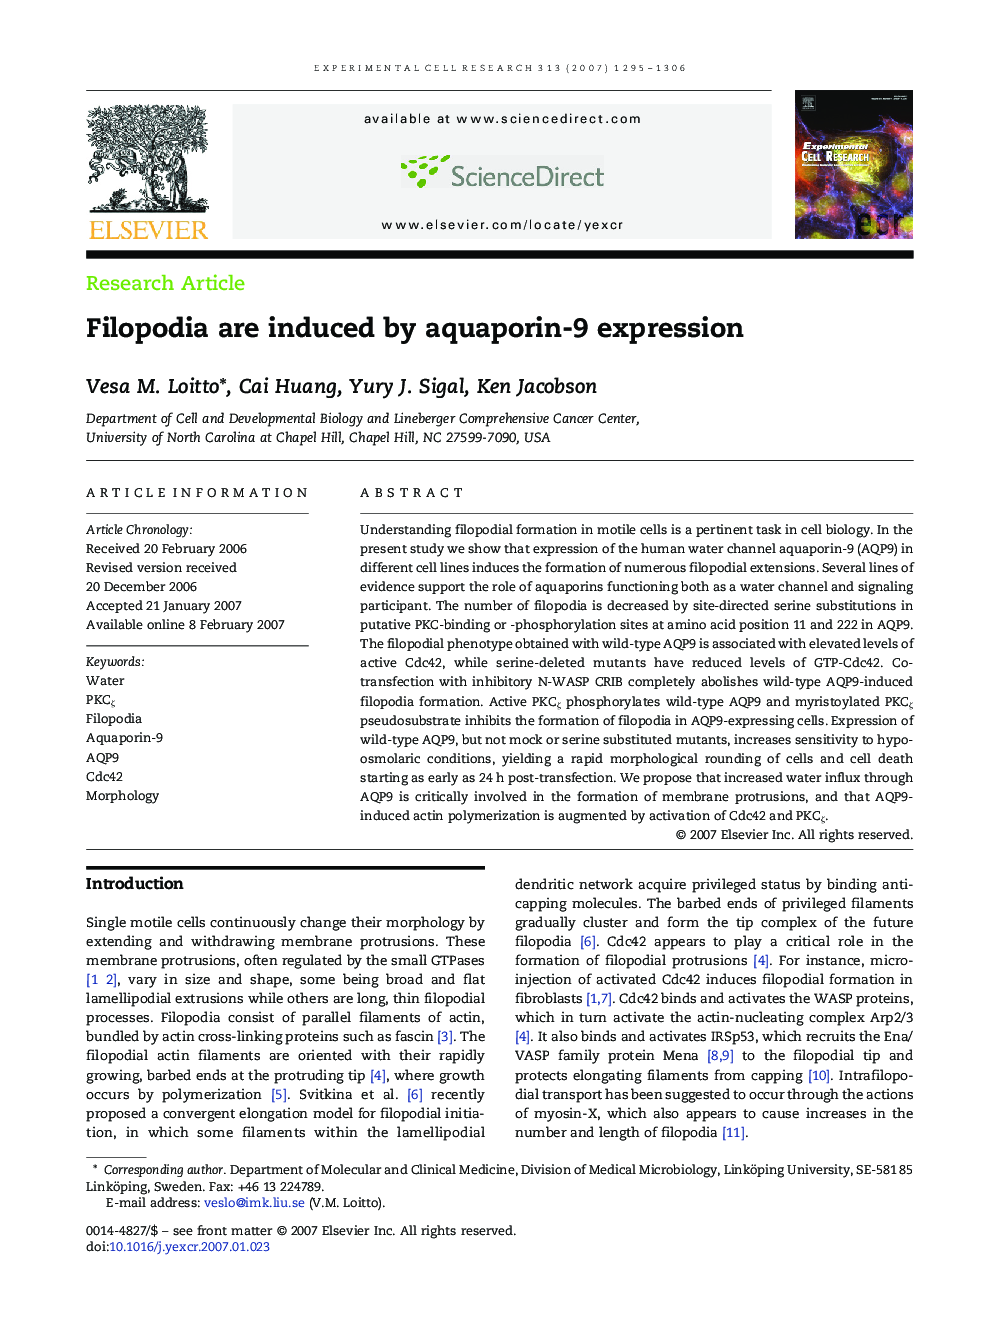 Filopodia are induced by aquaporin-9 expression